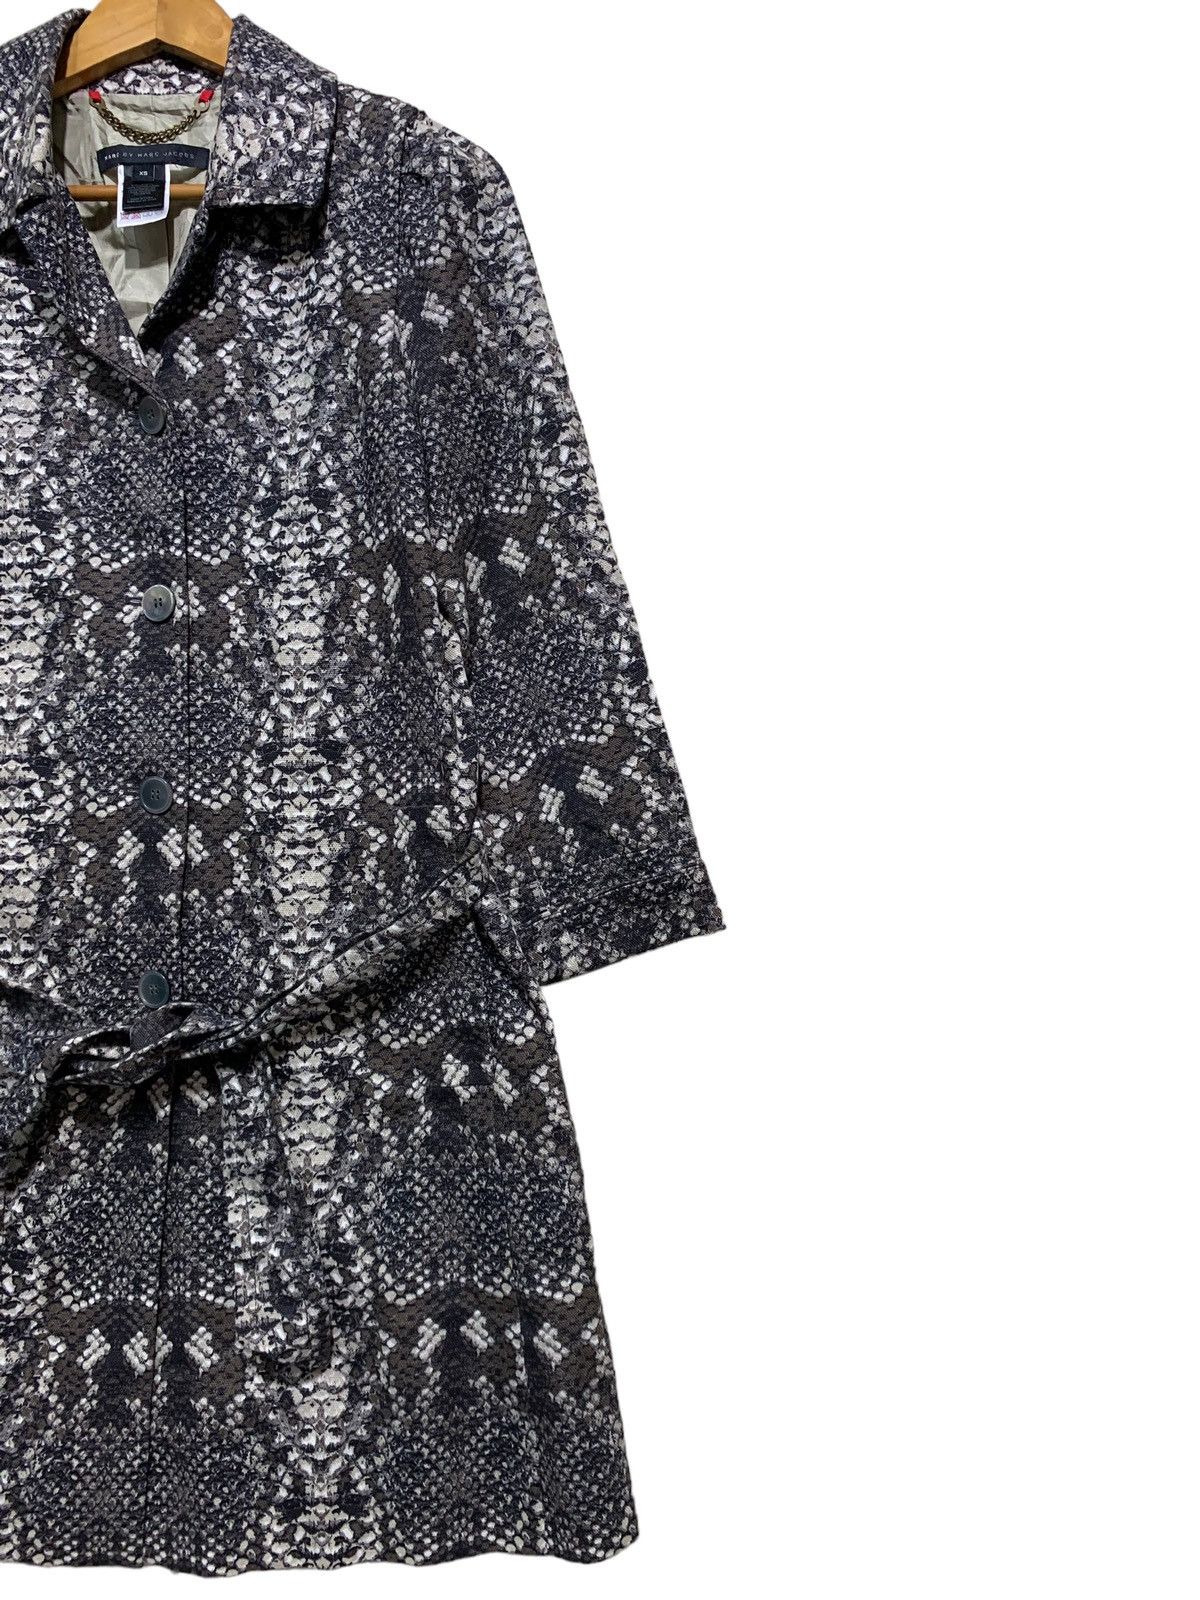 🔥MARC JACOBS SNAKESKIN PRINTED TRENCHCOATS - 3